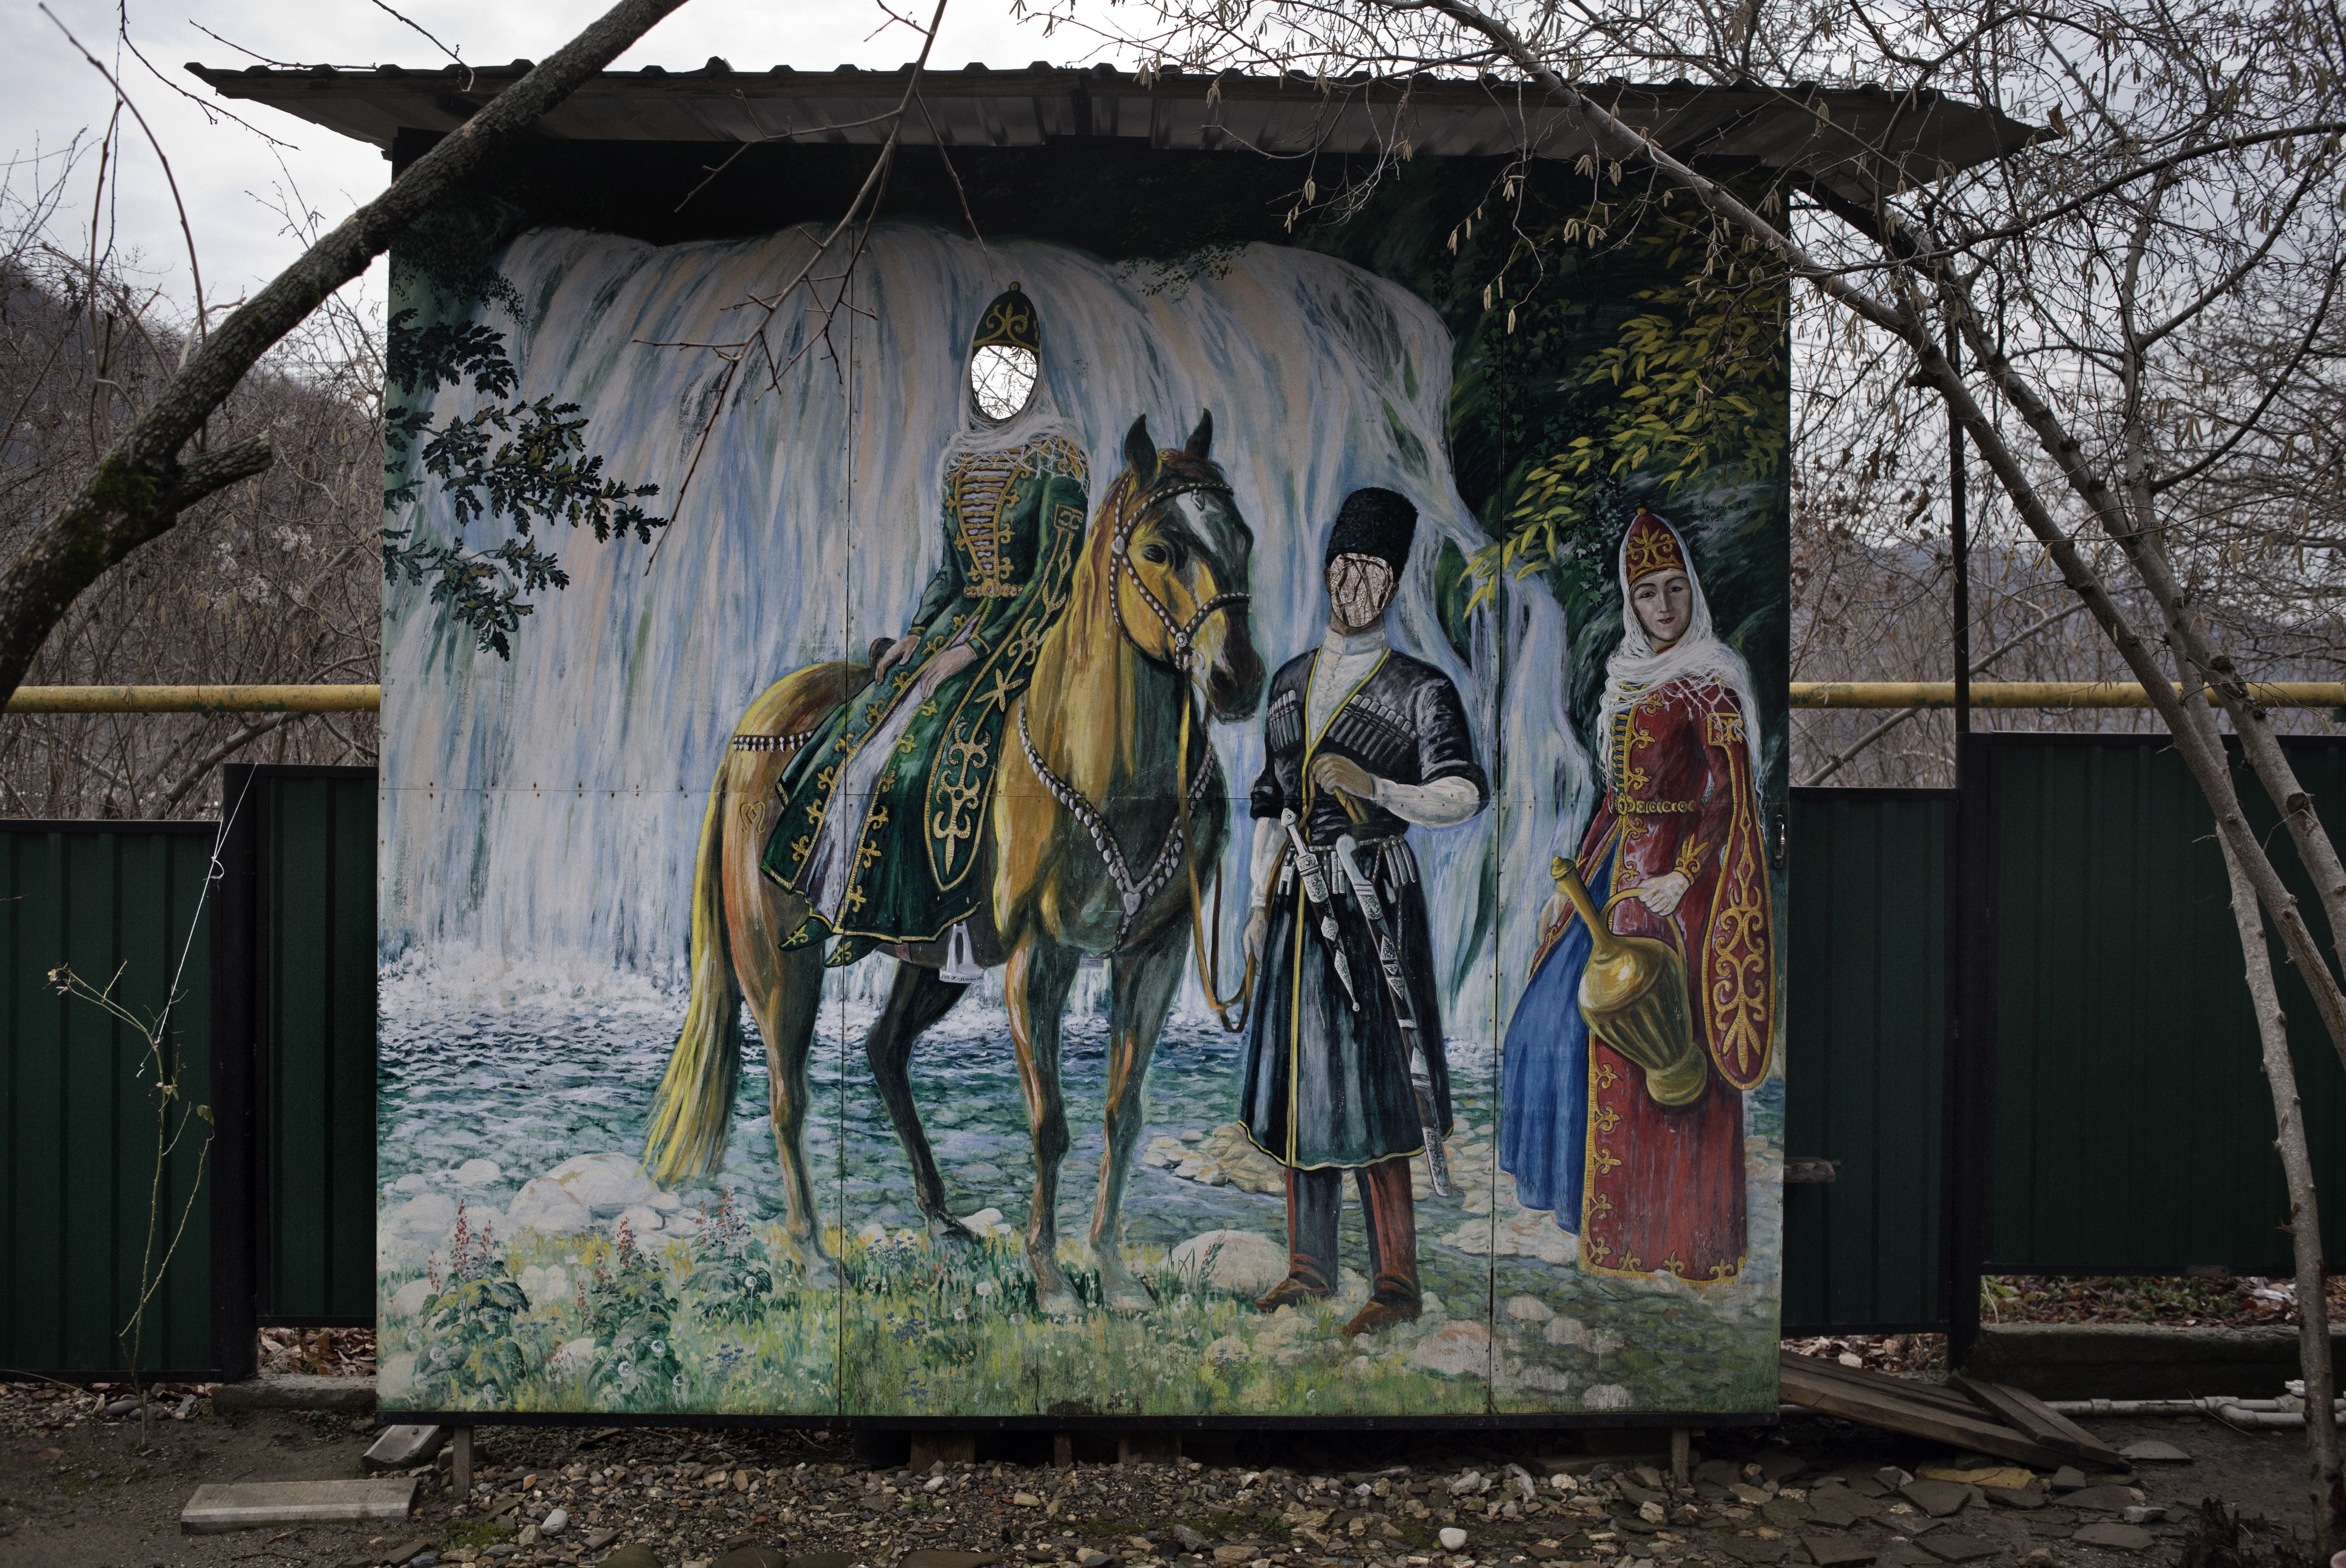 Sochi, Russia, January 2014: A carnival cutout shows traditional Circassian dress at a tourist destination in the Russian village of Kichmay.